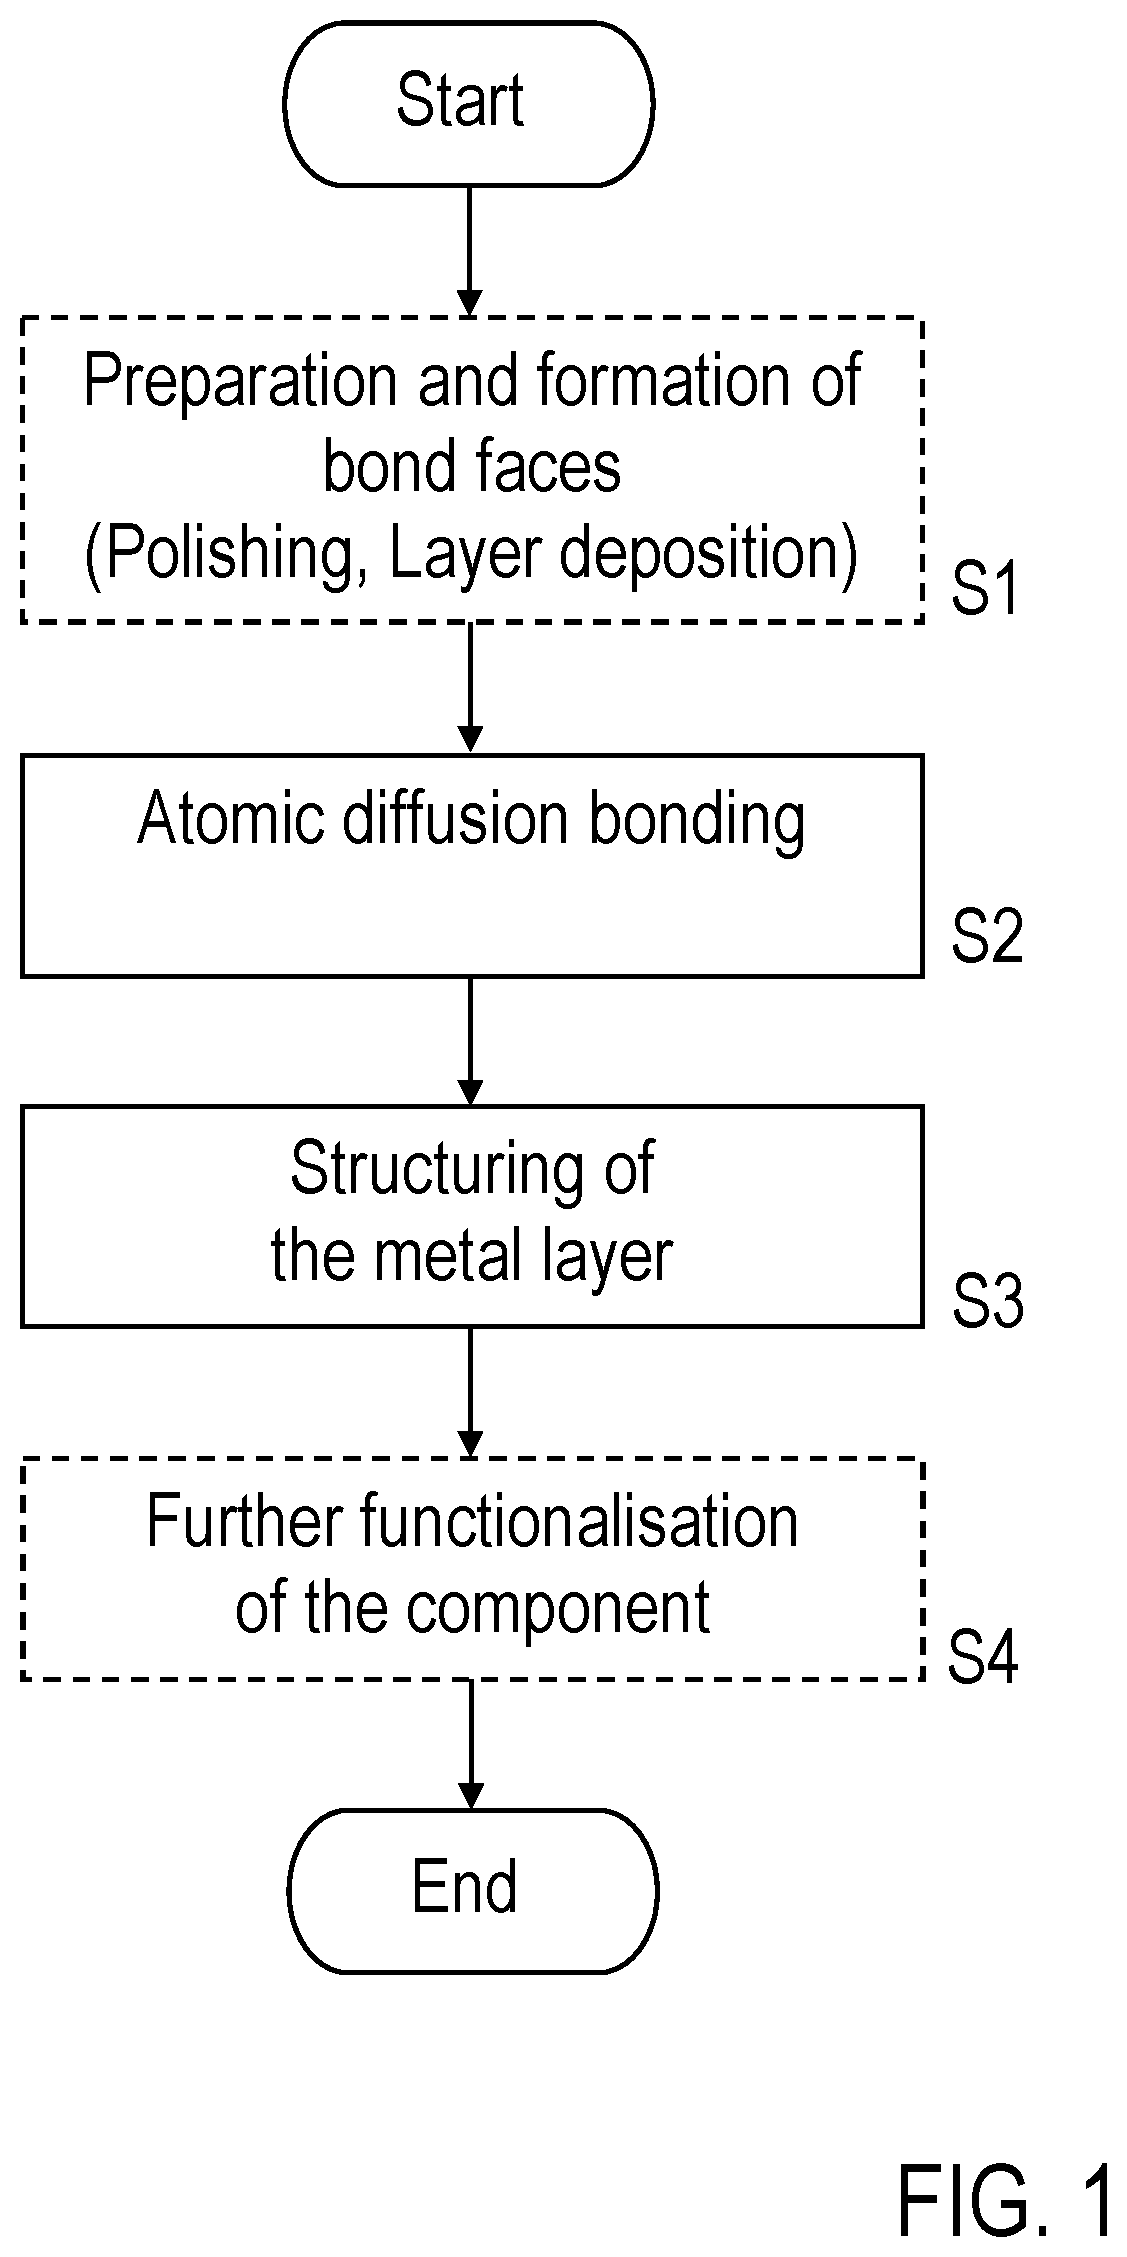 Method for production of a component by atomic diffusion bonding